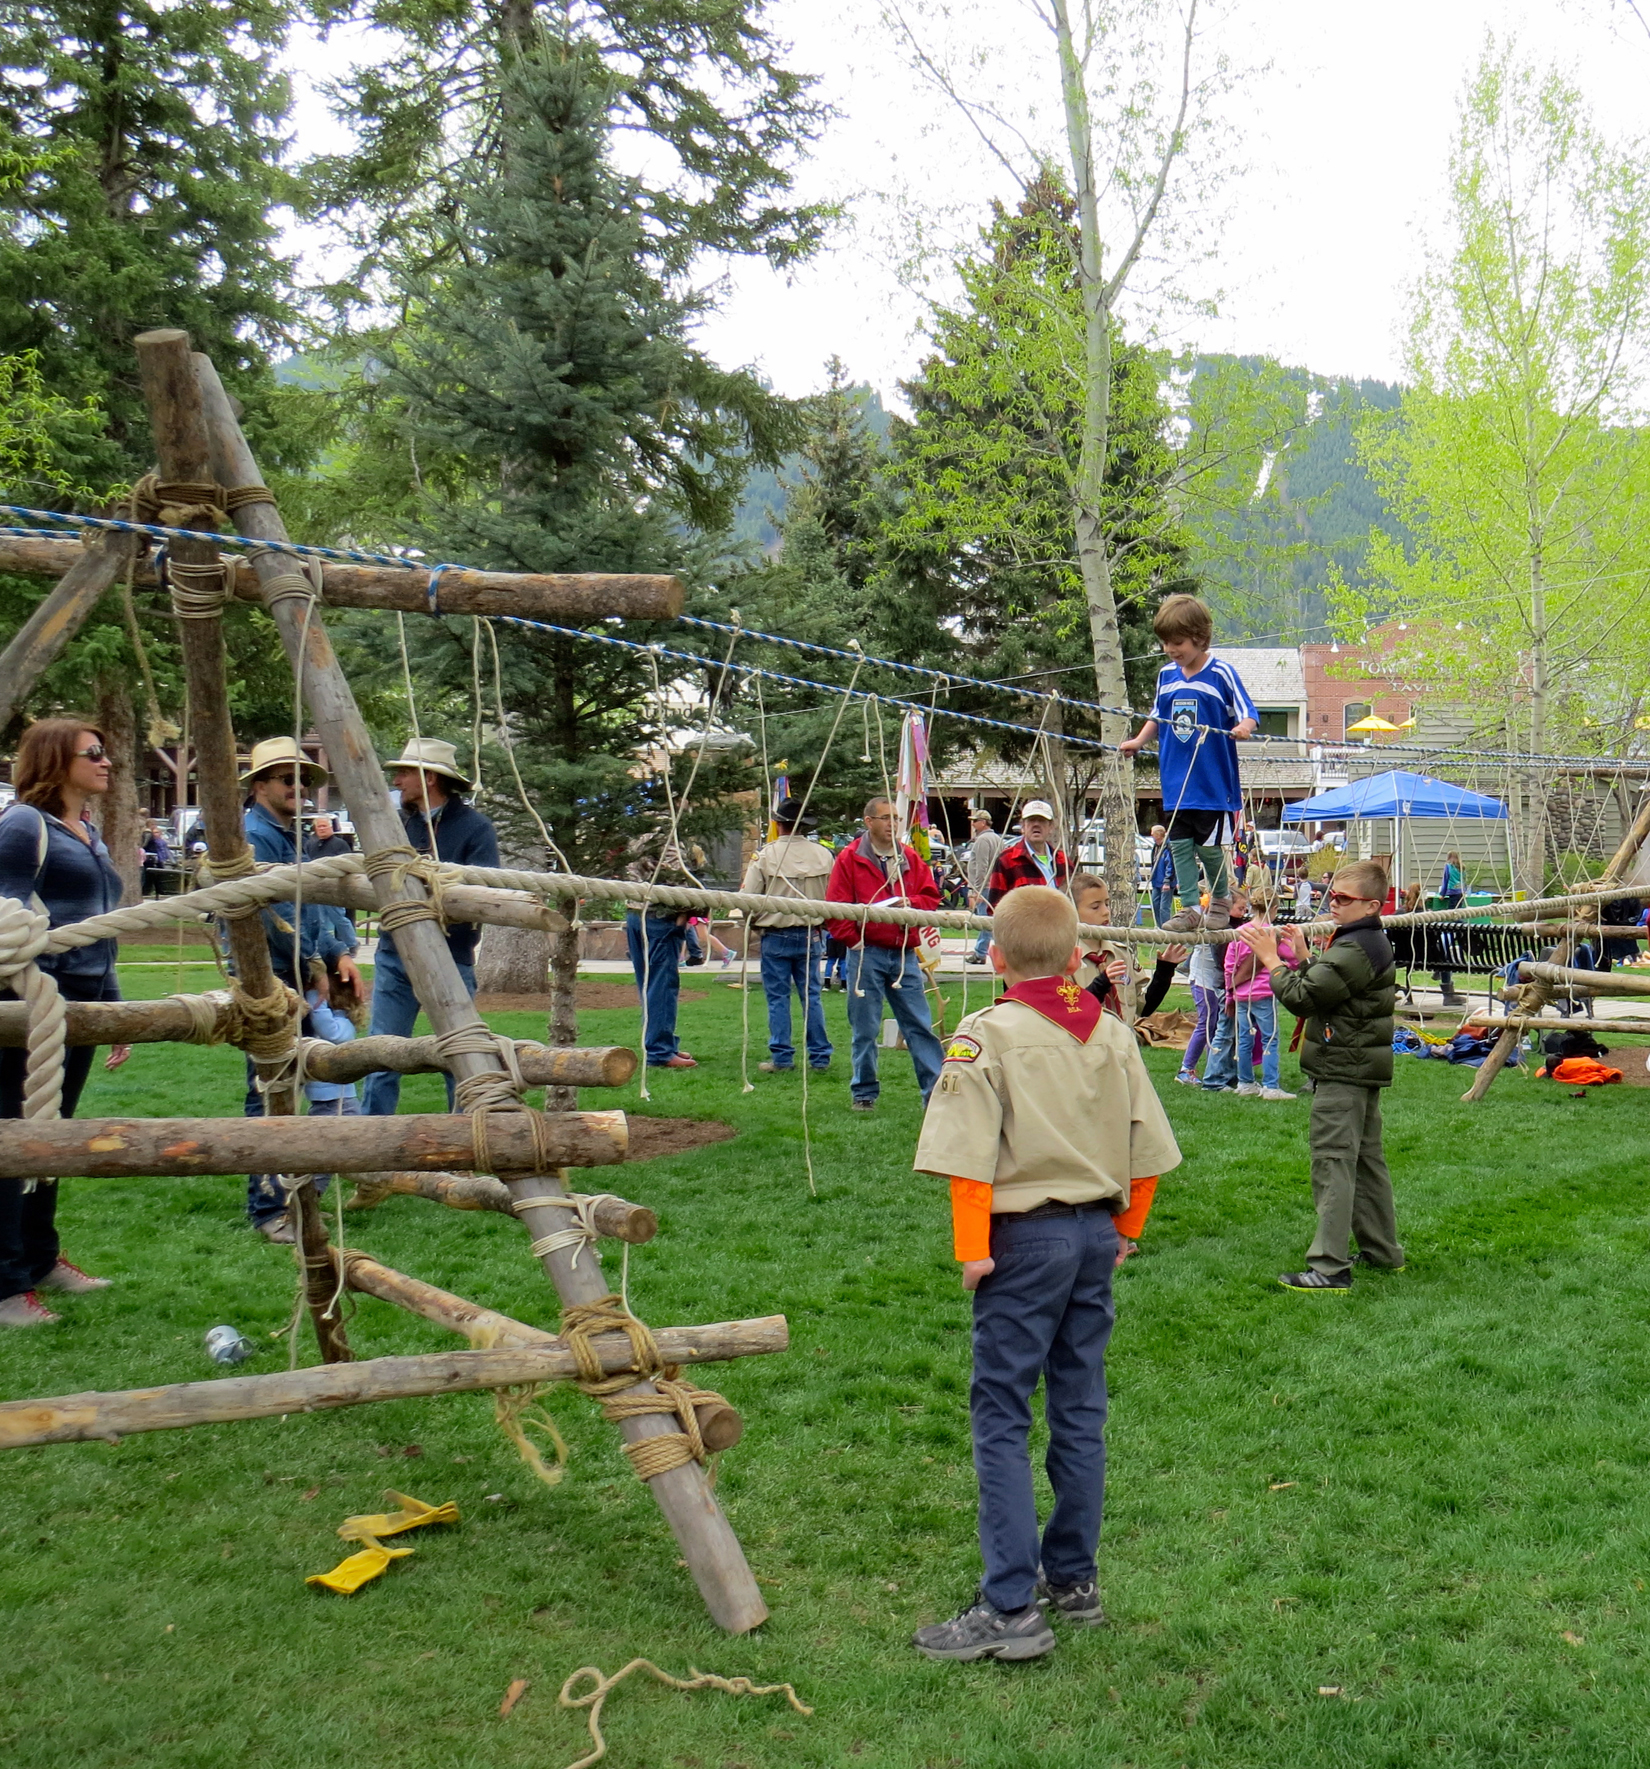 Kids from all around fill the famous Town Square lawn enjoying fun interactive and educational activities during ElkFest and Old West Days in Jackson Hole, Wyoming.